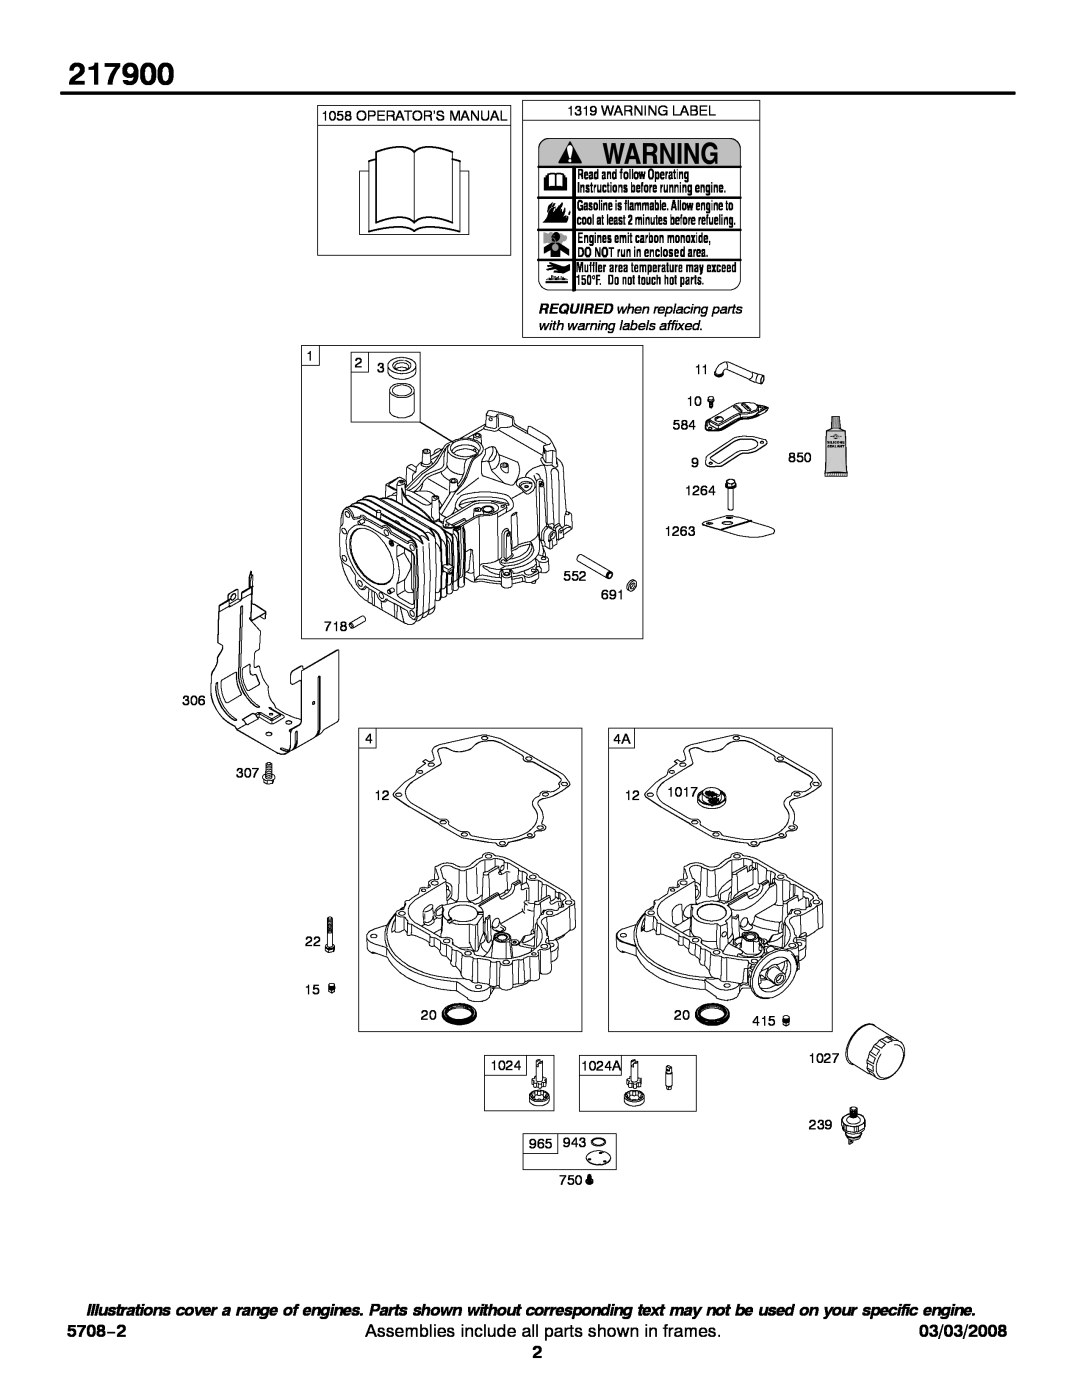 Briggs & Stratton 217900 service manual 5708−2, Assemblies include all parts shown in frames, 03/03/2008 